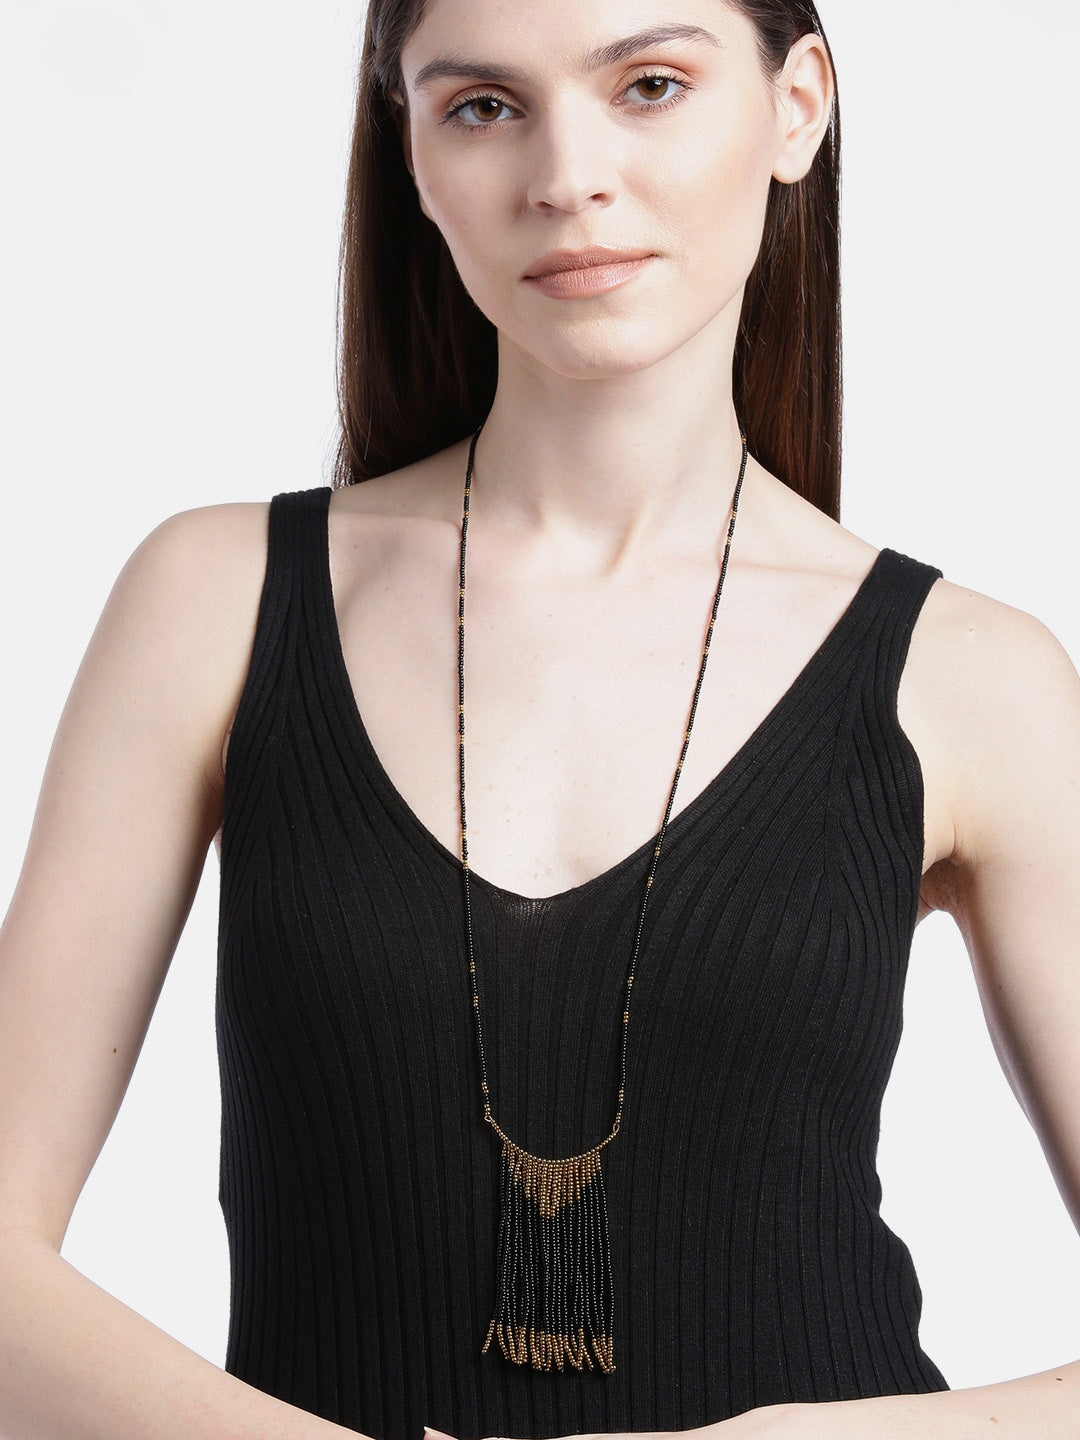 Black & Gold Beaded Antique Necklace with Fringed Detail